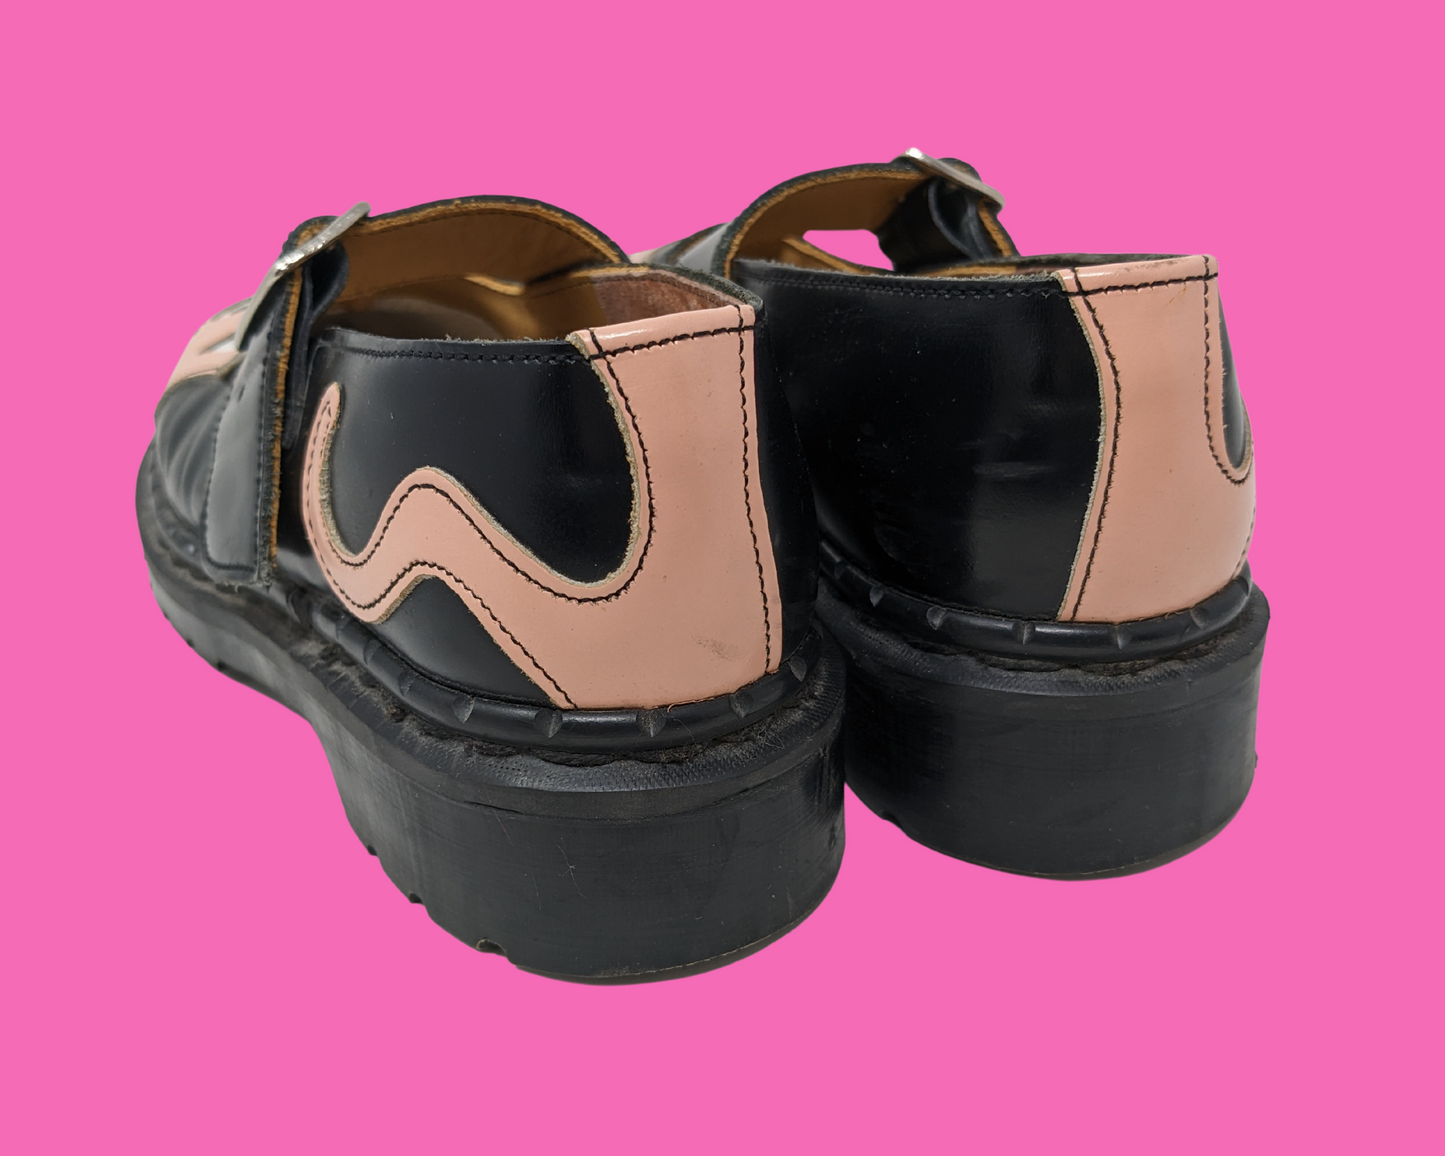 Vintage 1990's Tredair England Pink and Black Leather Kitties Shoes Size US 6.5